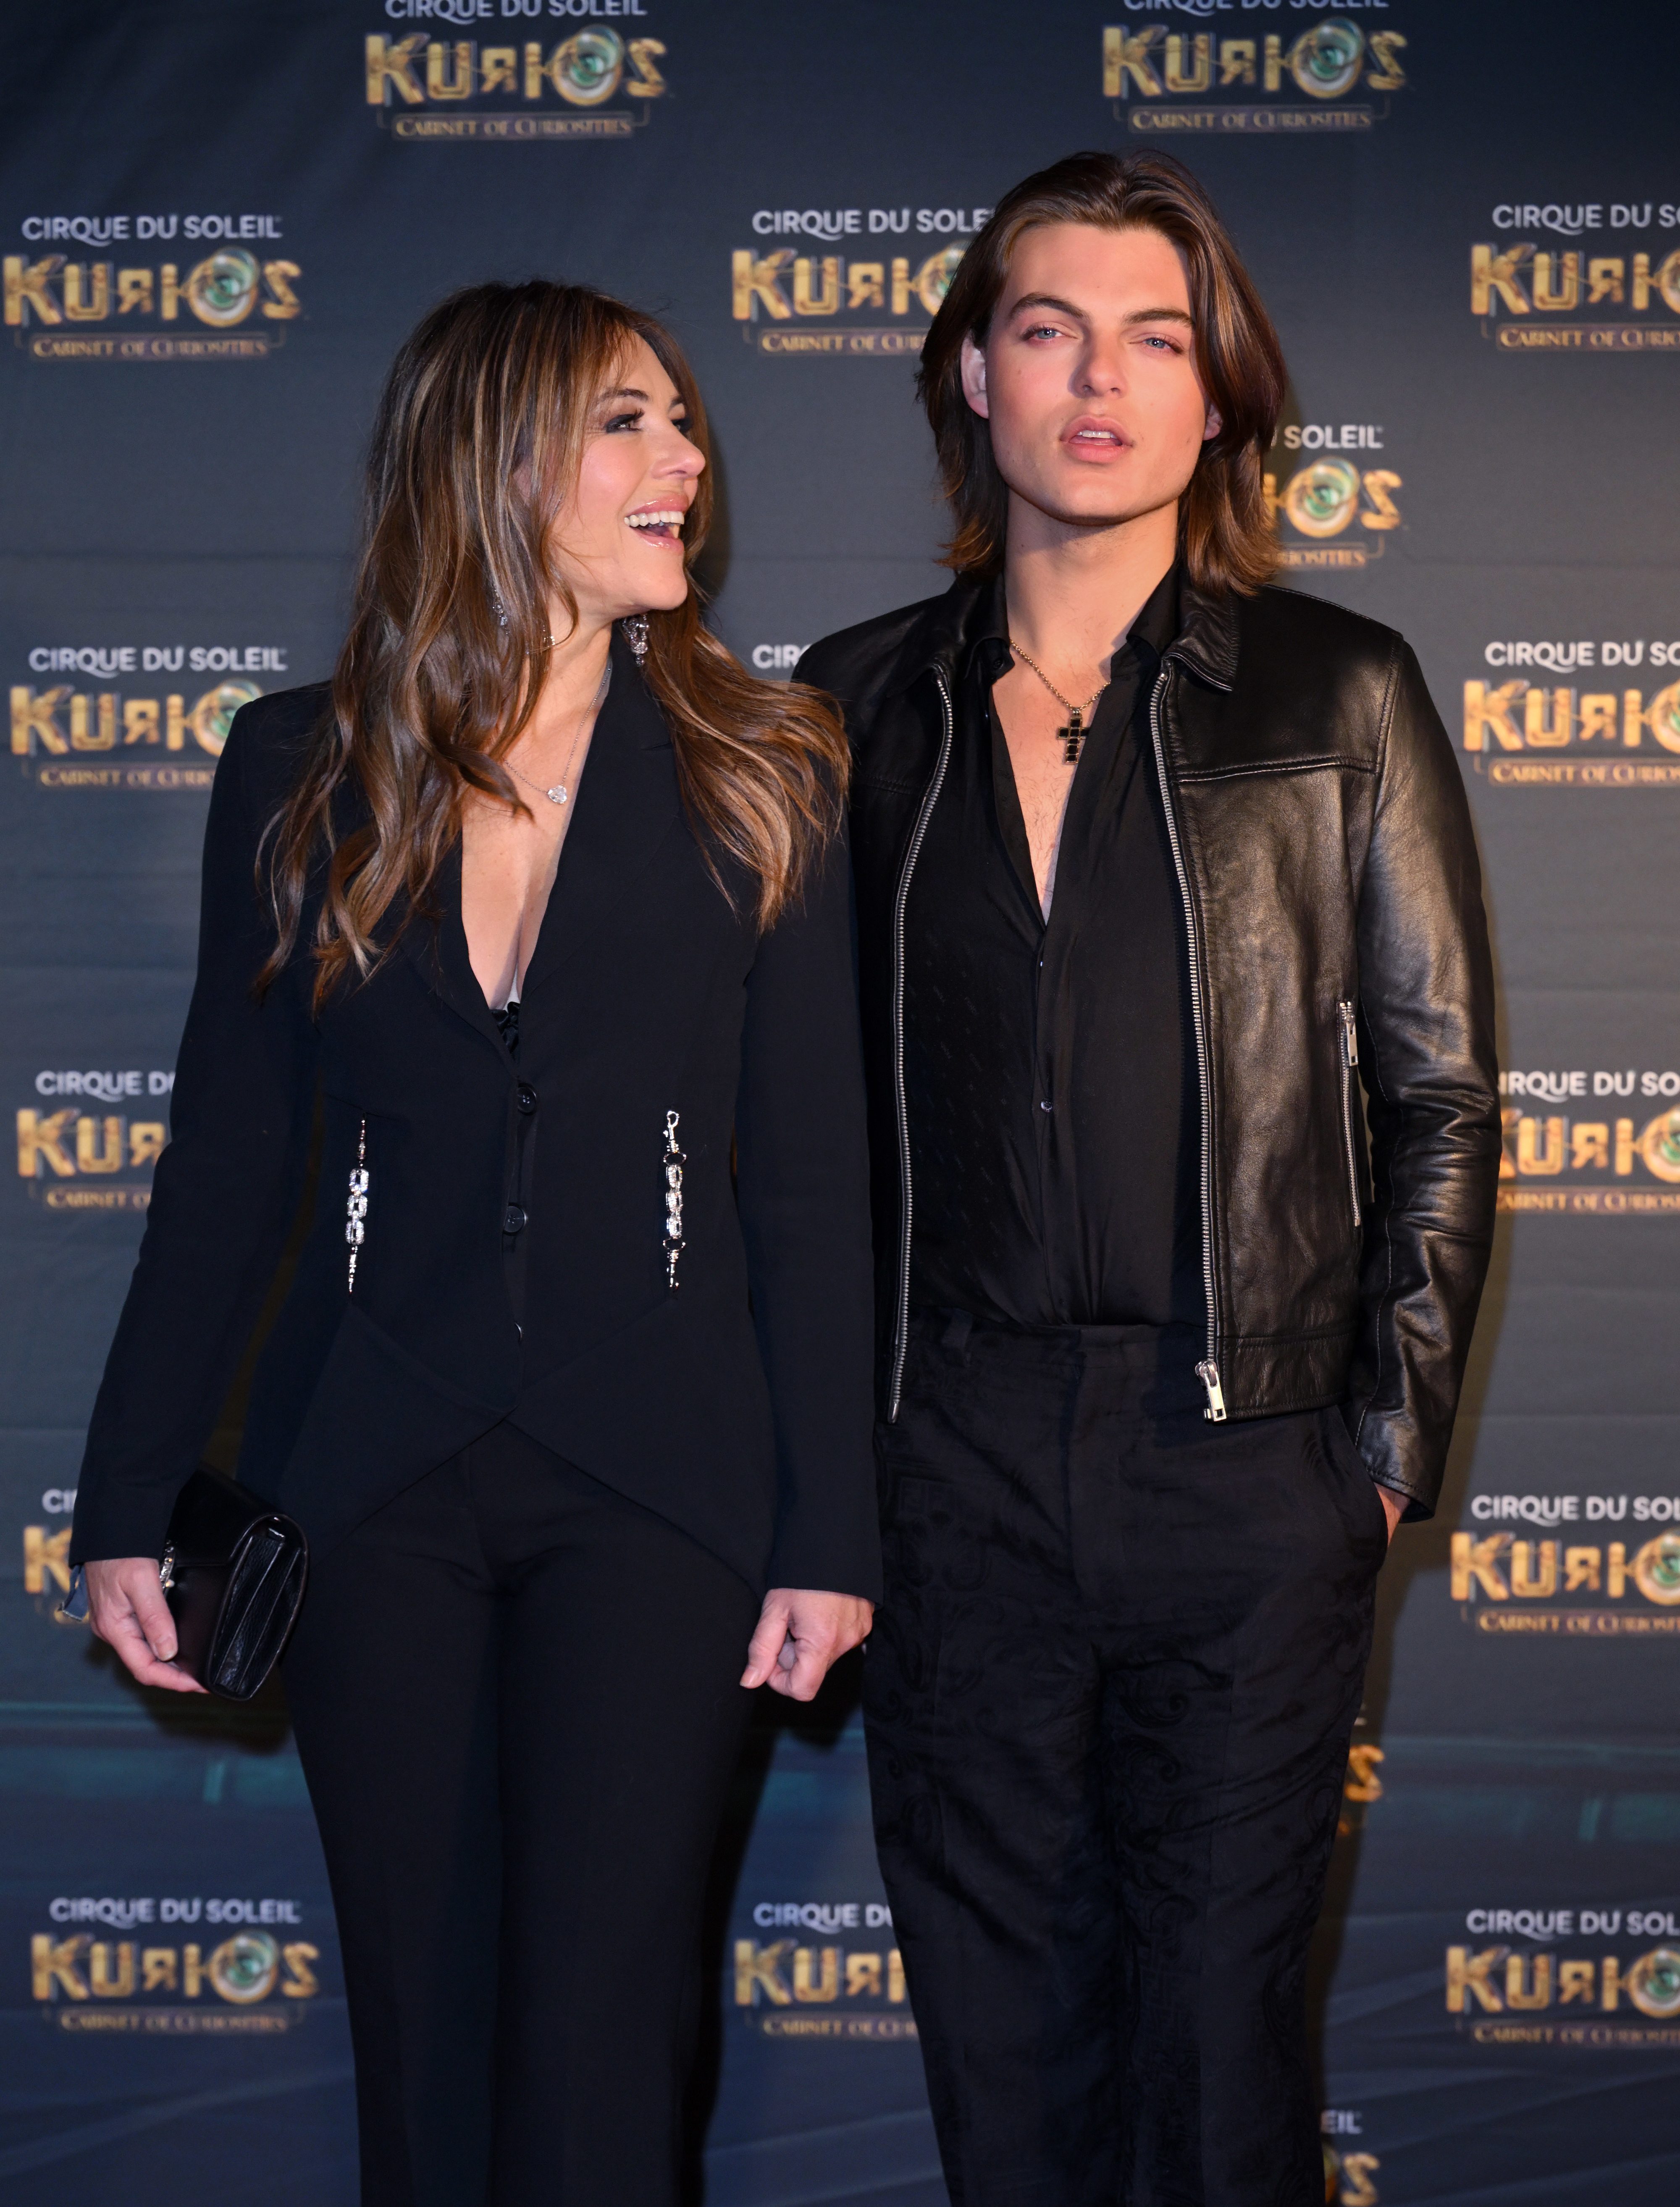 Elizabeth Hurley and Damian Hurley on the red carpet